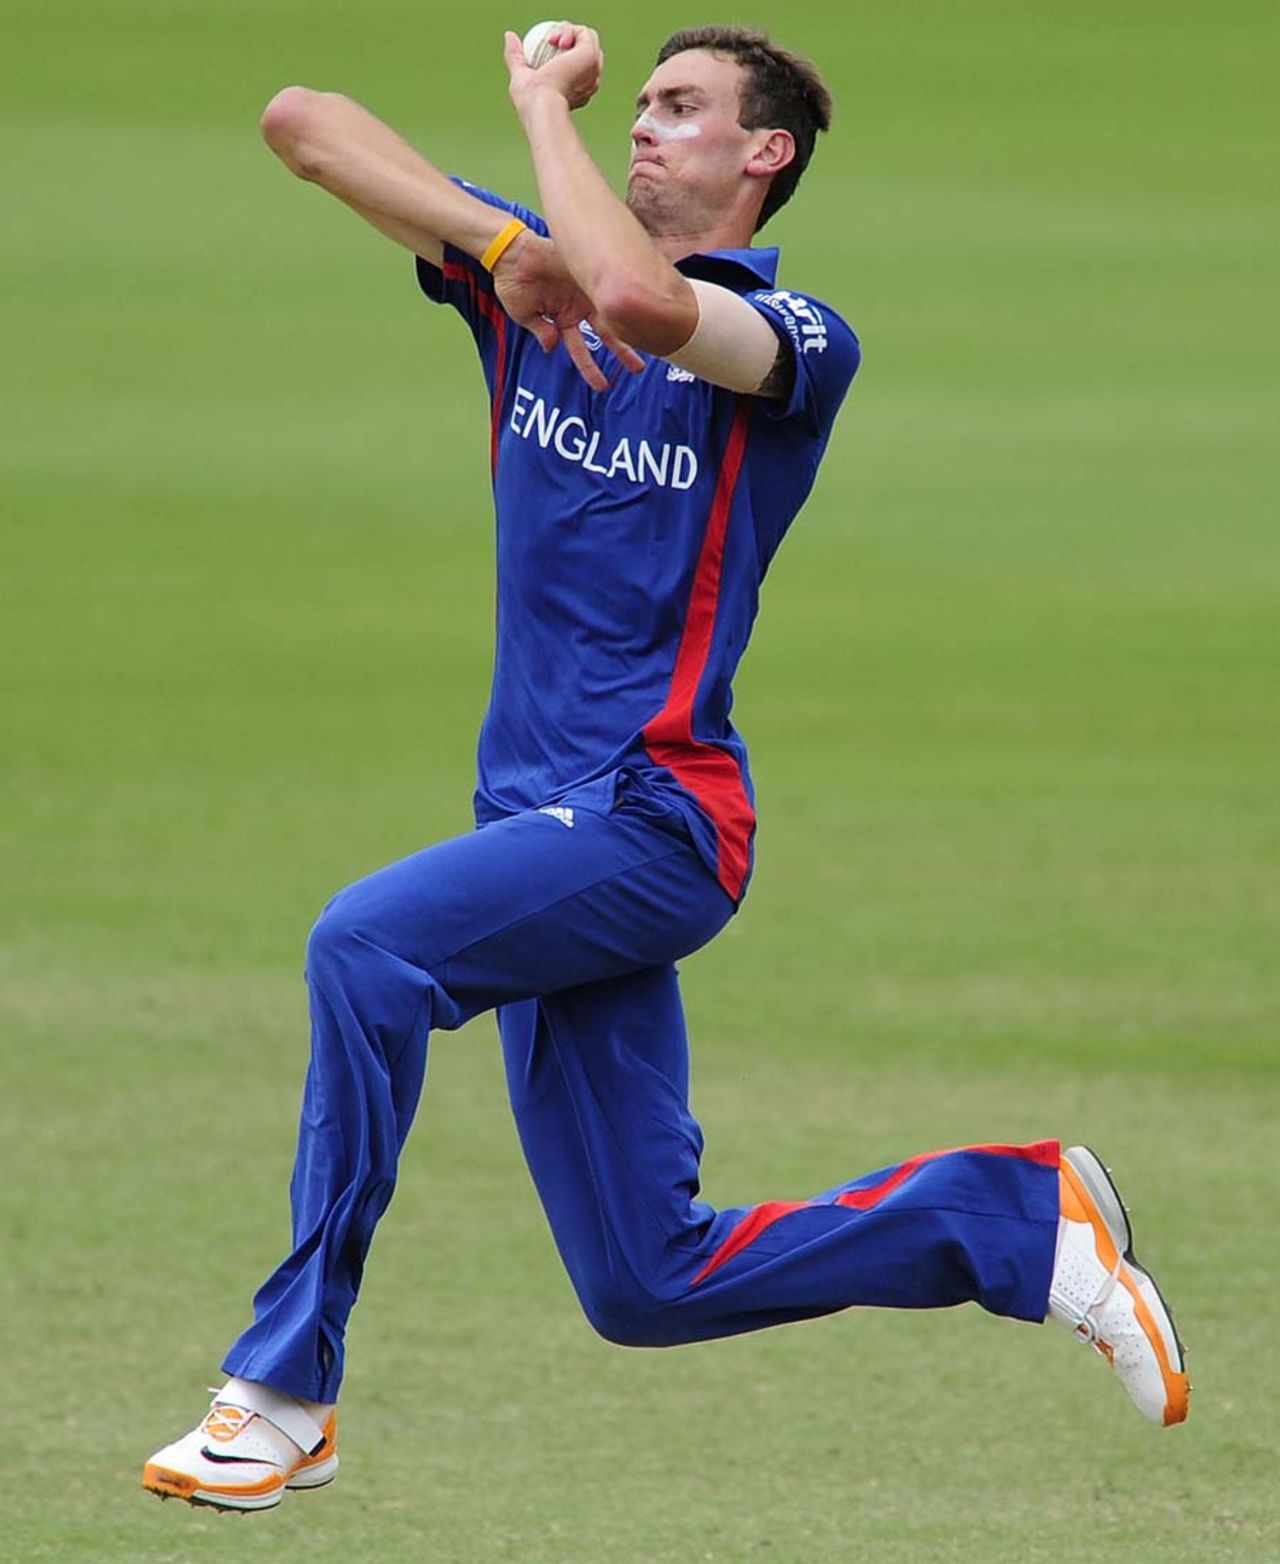 Reece Topley took three wickets, England v South Africa, quarter-final, ICC Under-19 World Cup 2012, Townsville, August 19, 2012